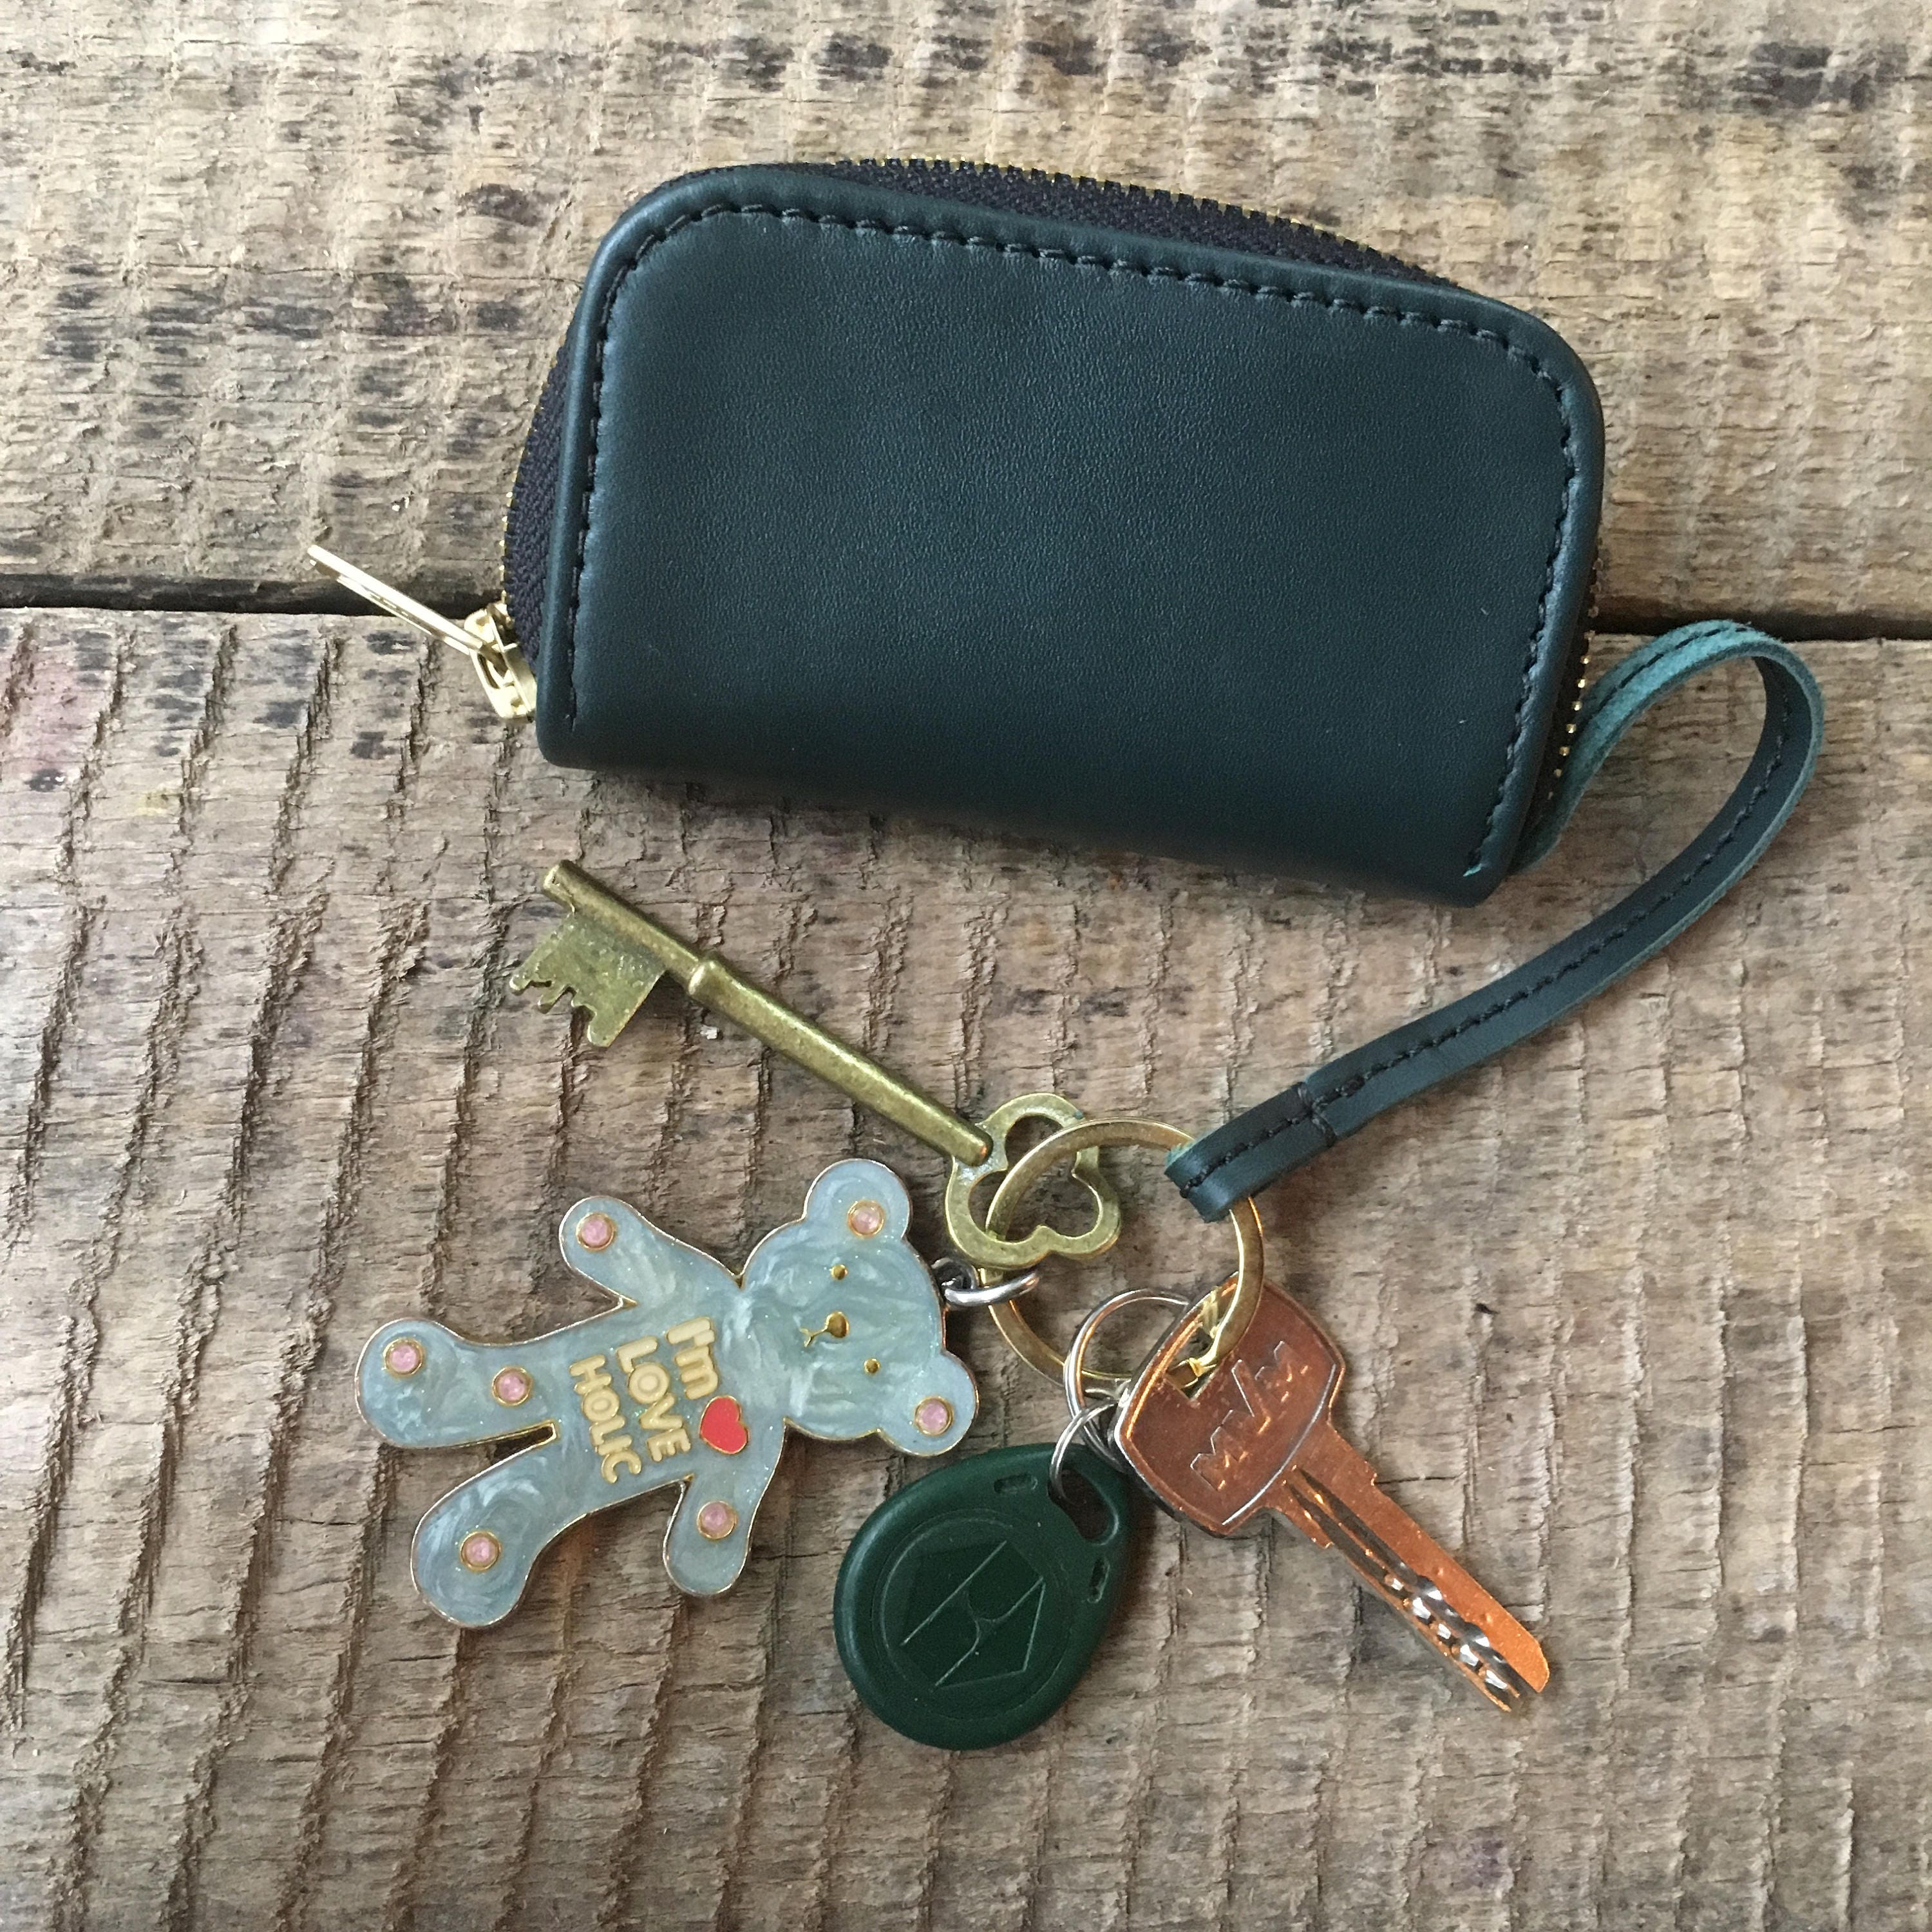 Leather Key Pouch Wallet Slim Keychain with 6 Key Holder – Rustic Town